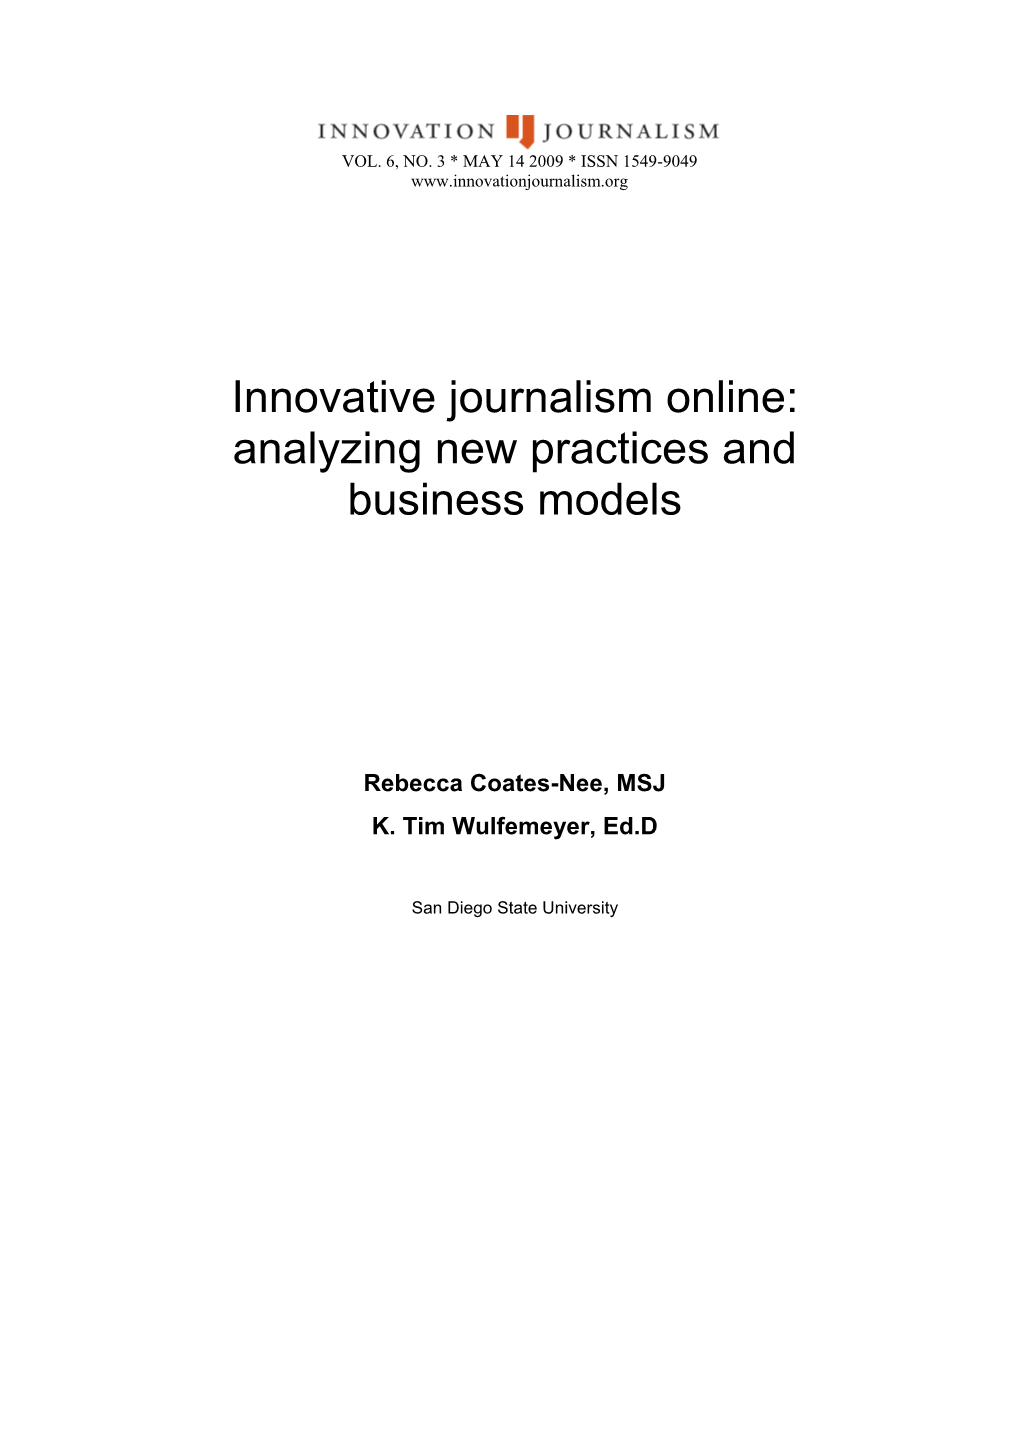 Innovative Journalism Online: Analyzing New Practices and Business Models